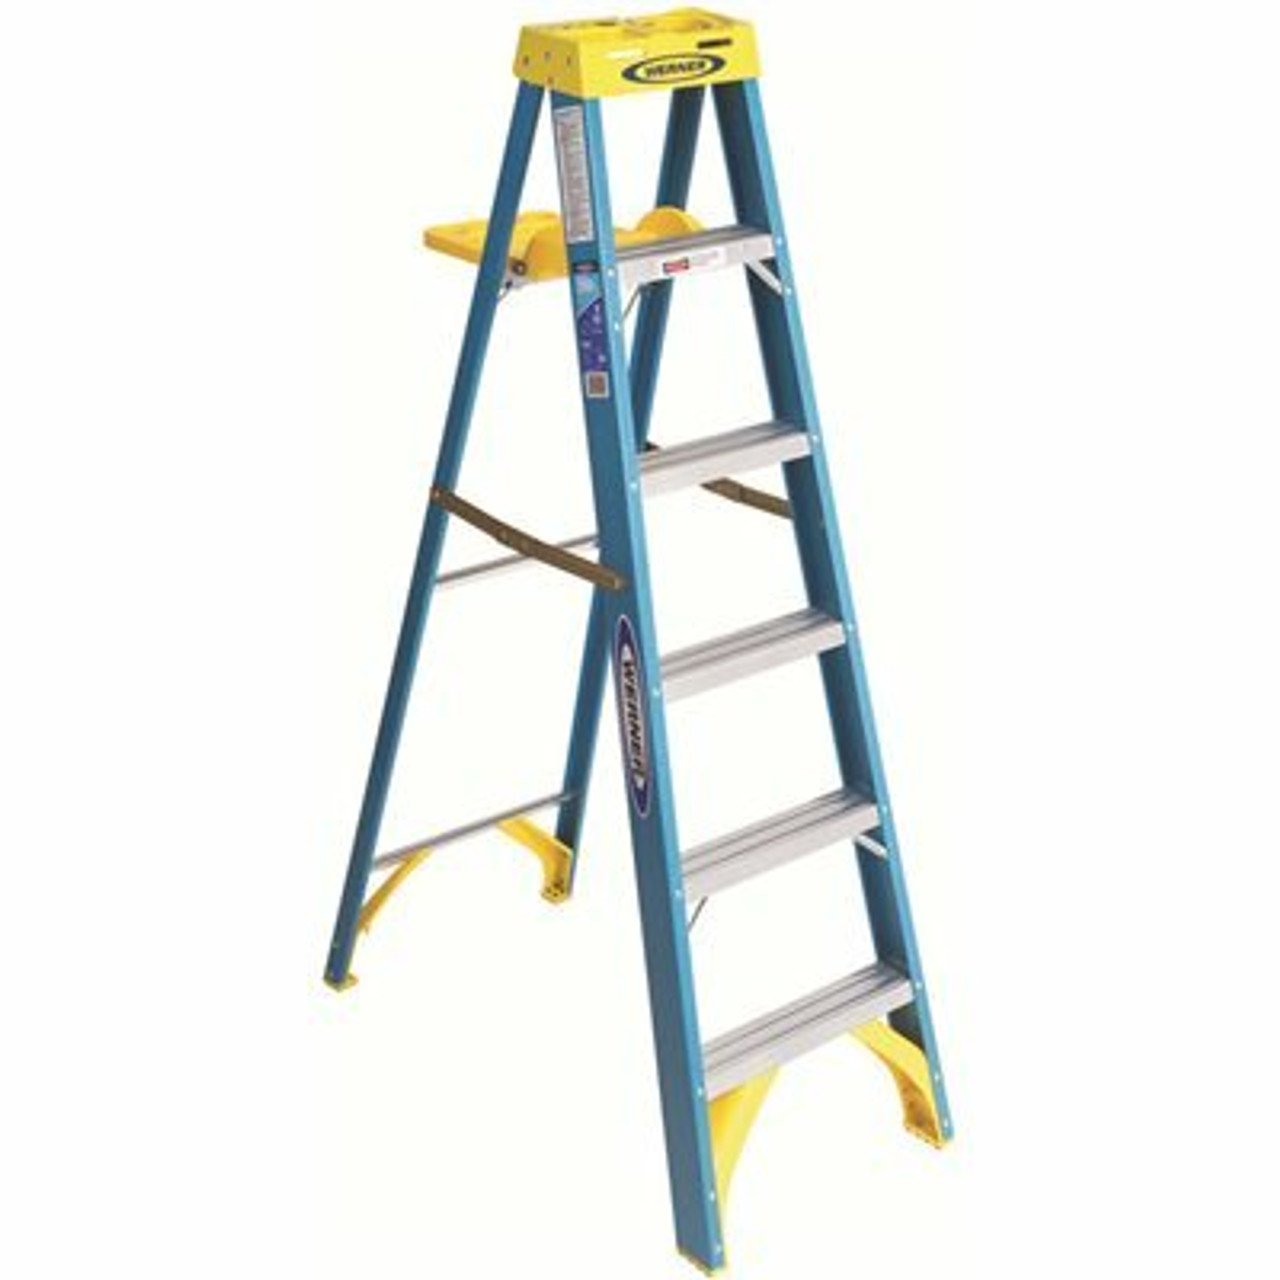 Werner 6 Ft. Fiberglass Step Ladder With 250 Lbs. Load Capacity Type I Duty Rating